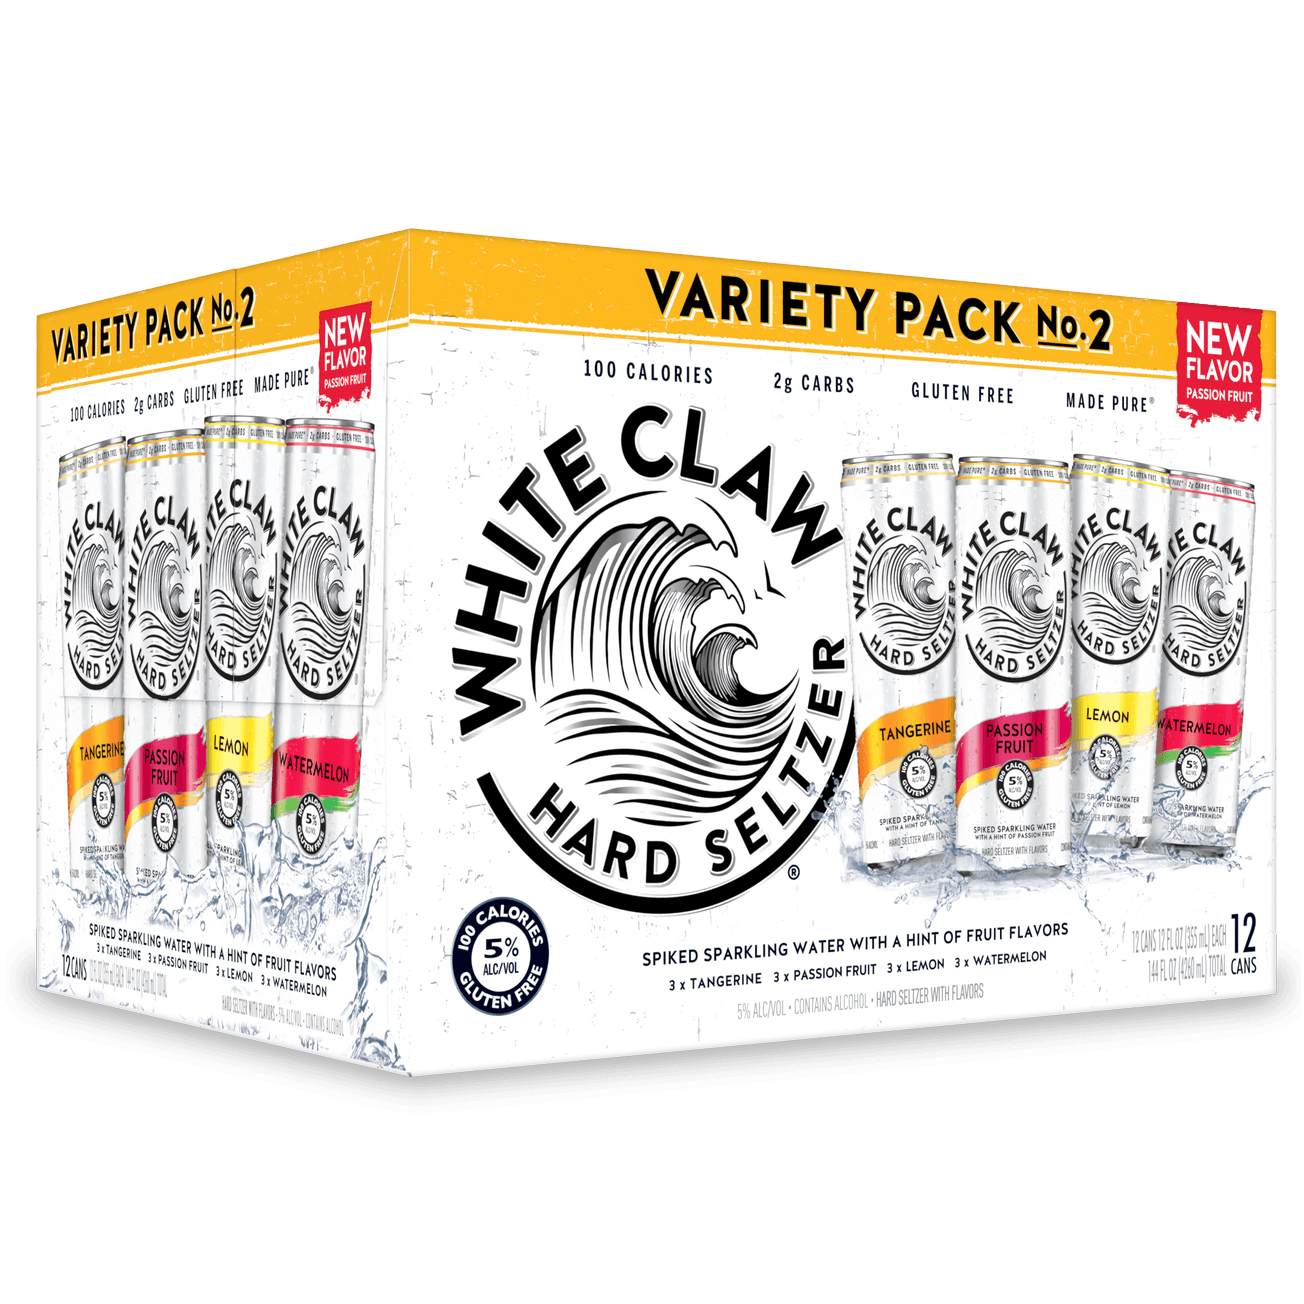 White Claw Hard Seltzer Variety Pack No.2